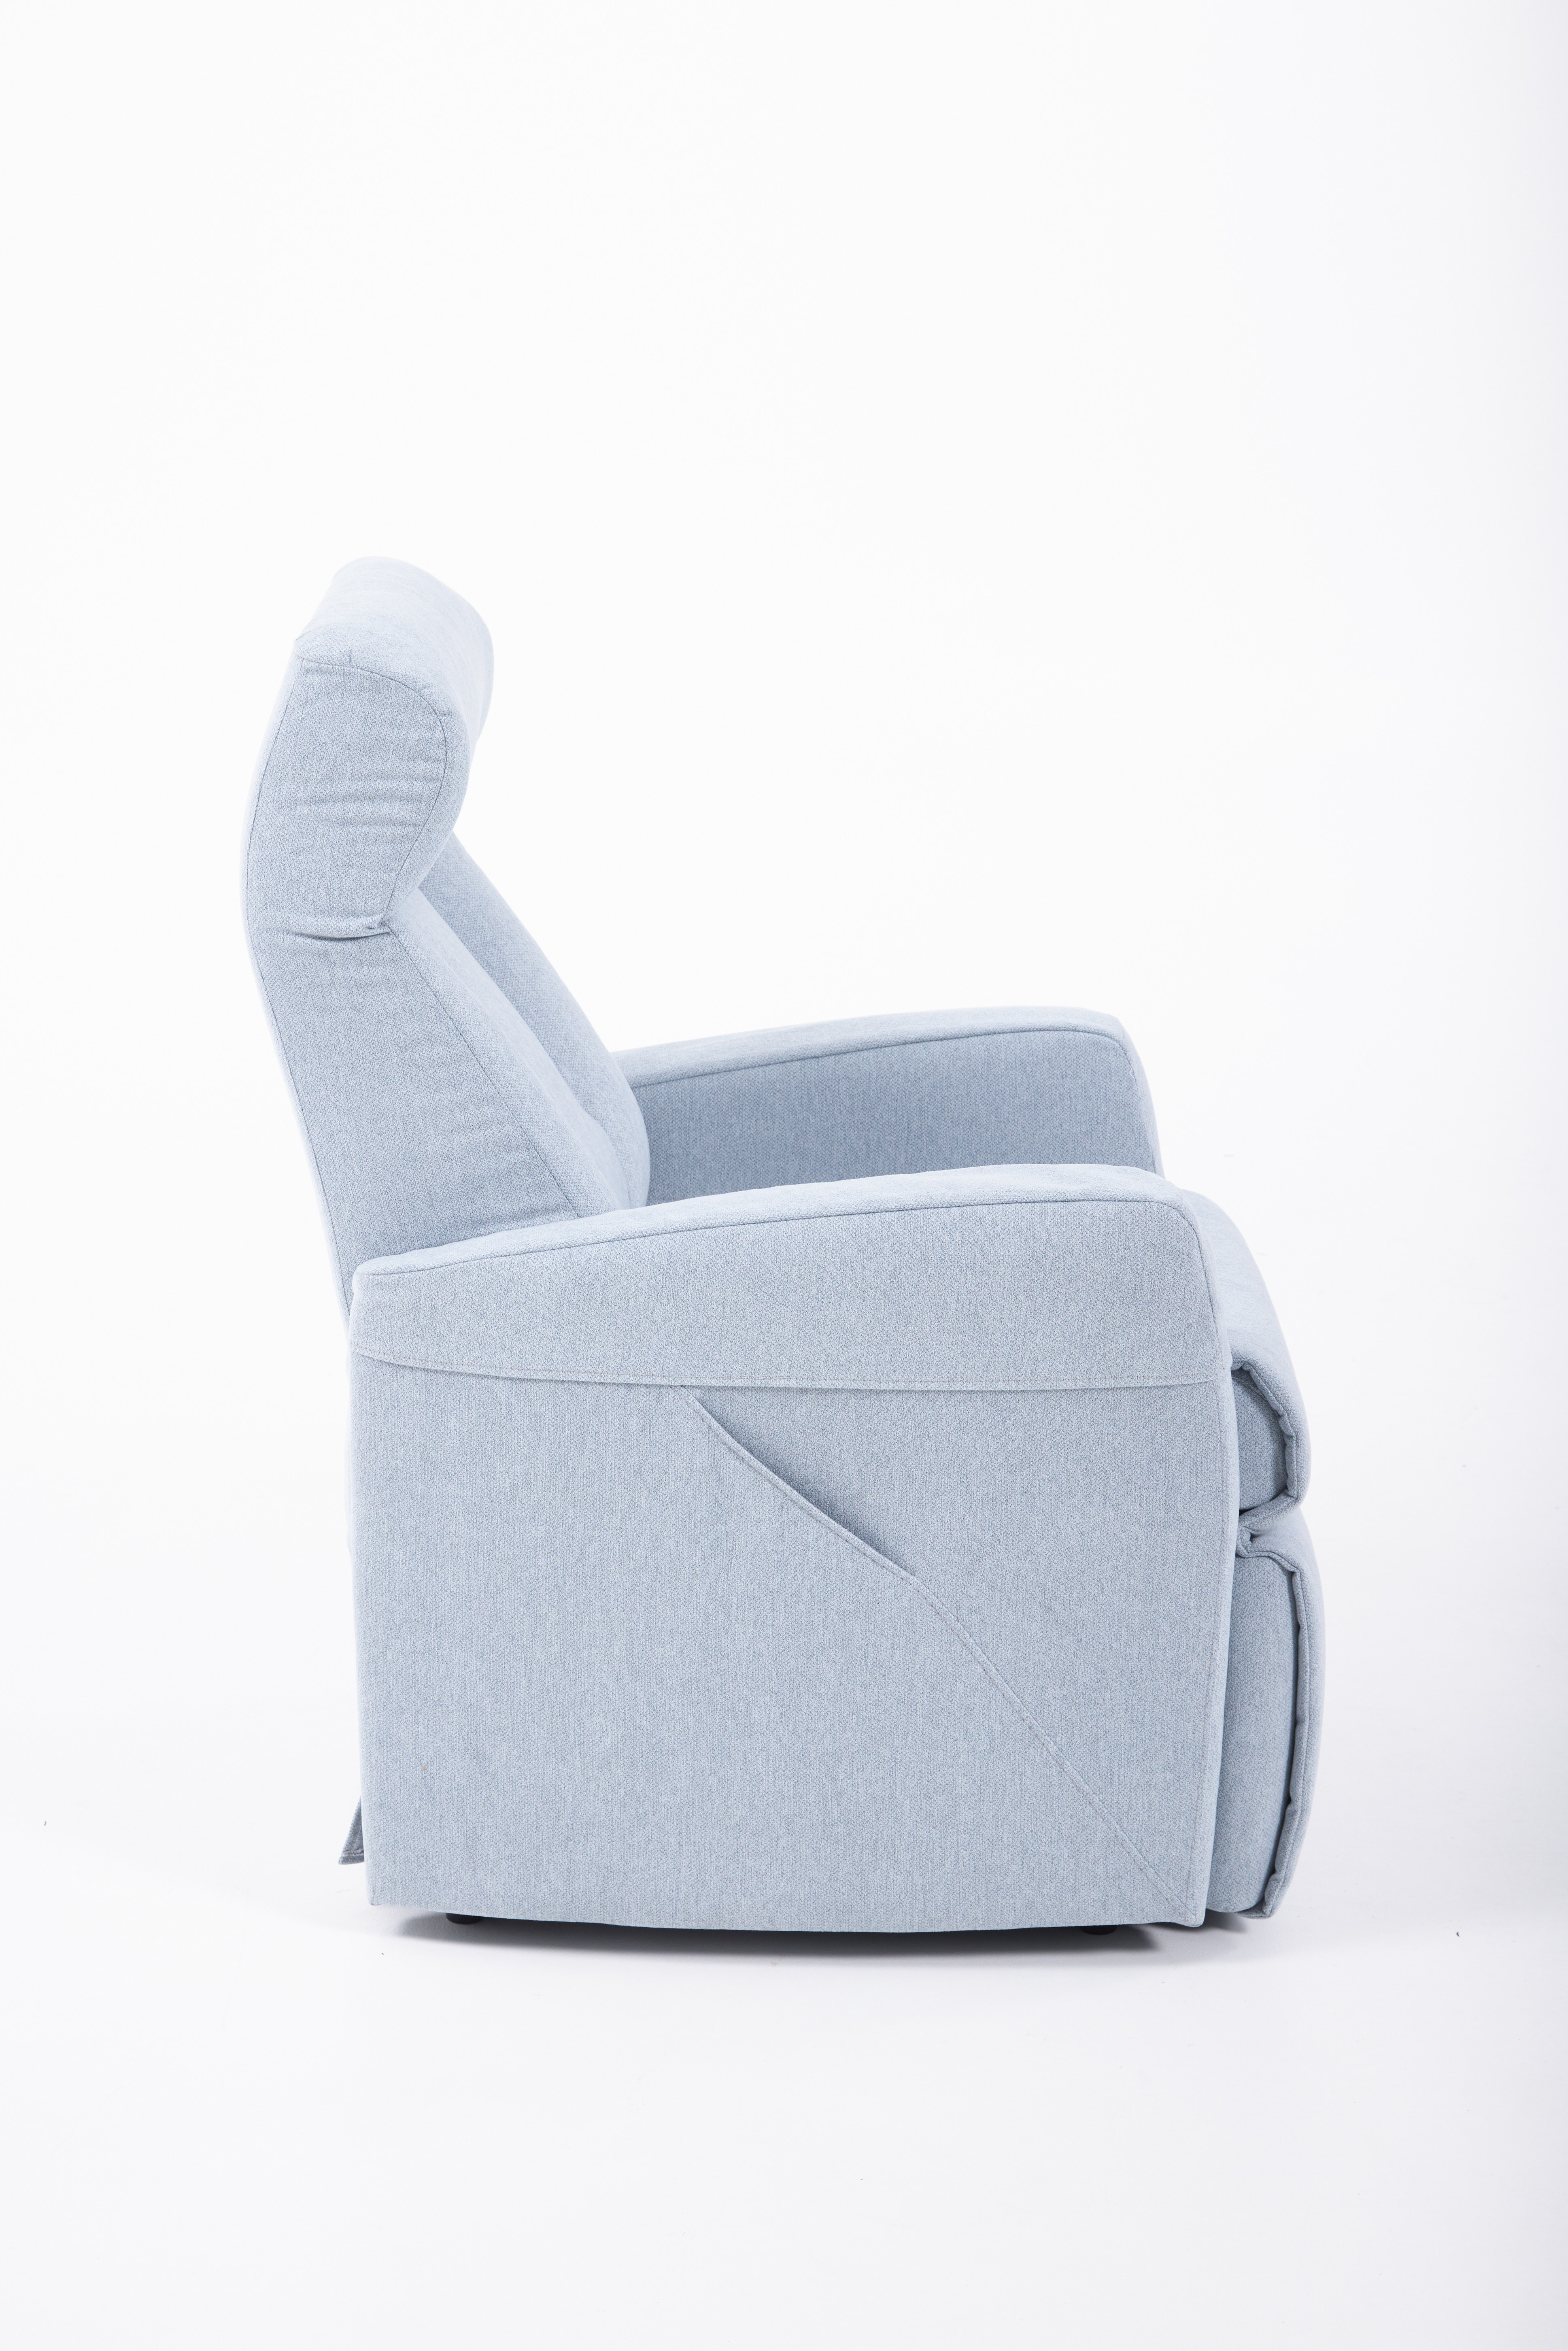 Nordic Spirit Prince Rise and Recline Chair Light Blue